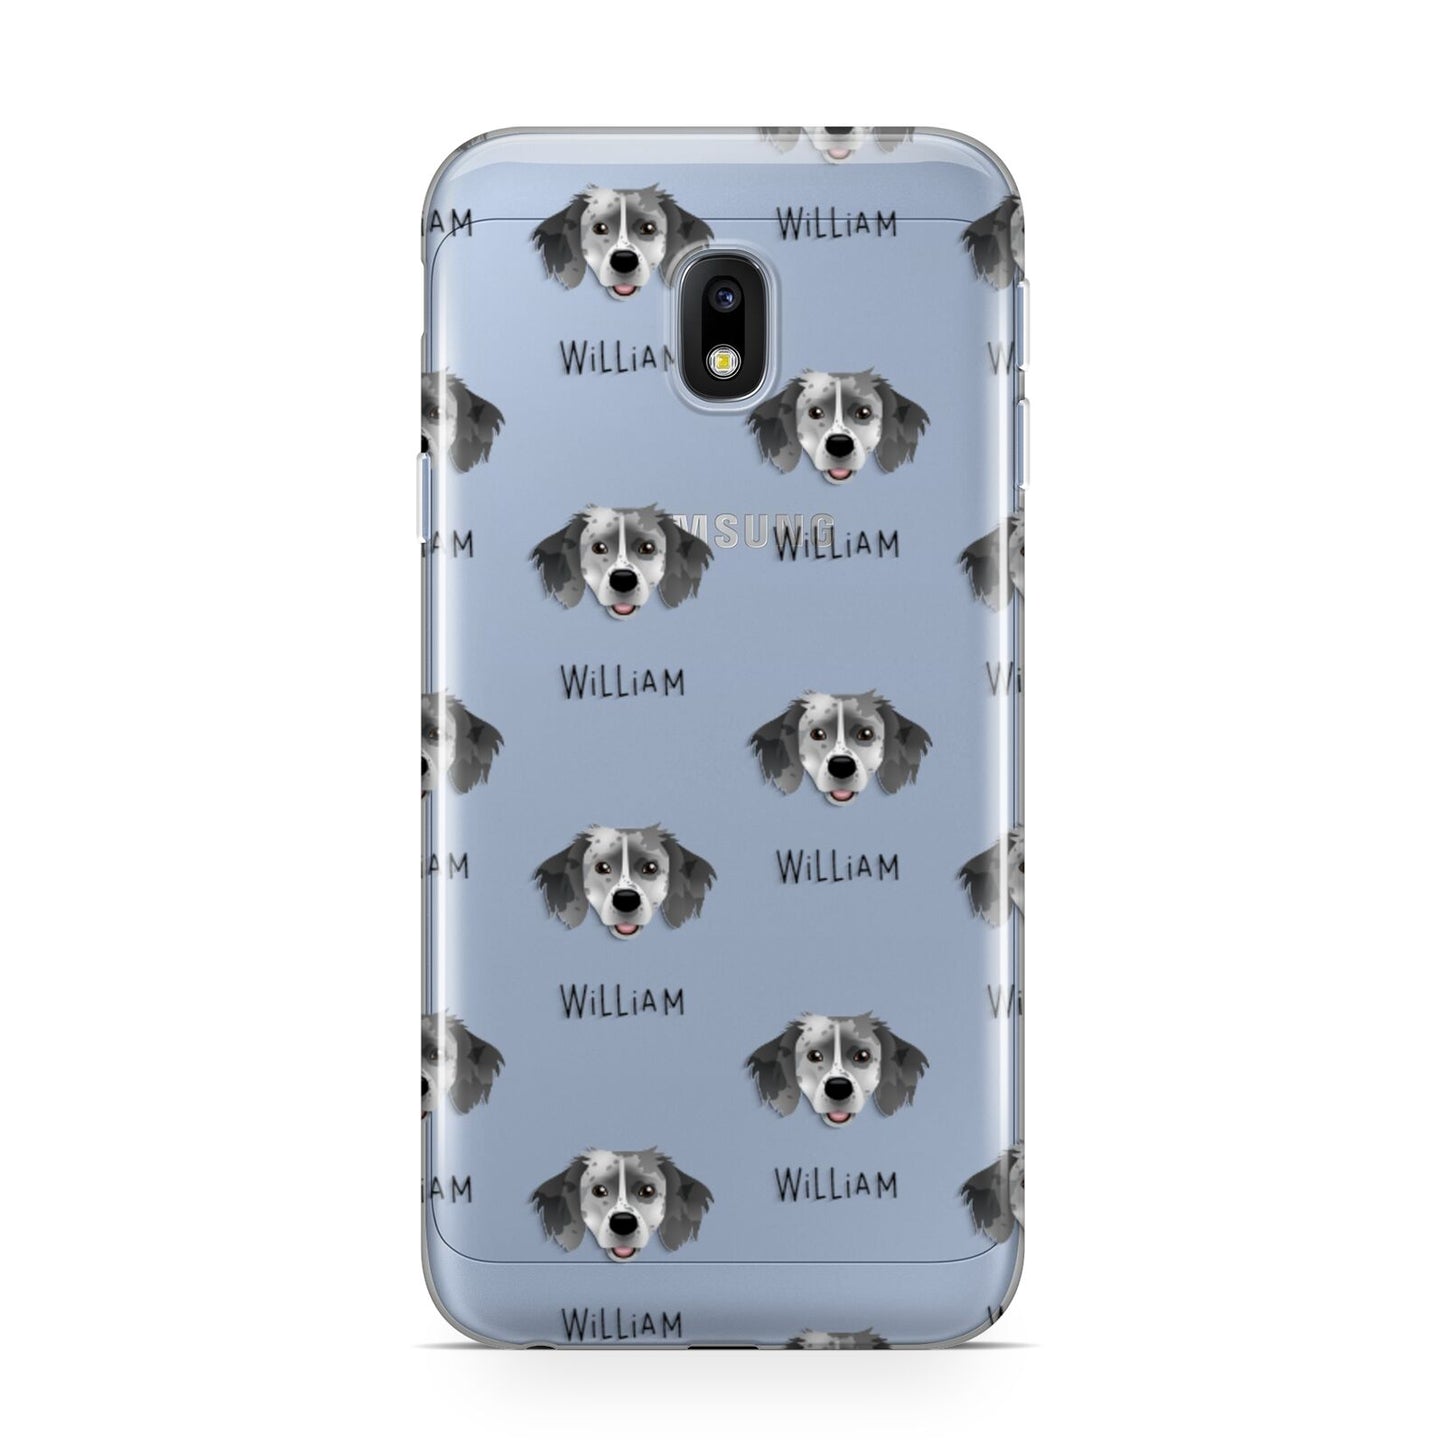 Sprollie Icon with Name Samsung Galaxy J3 2017 Case